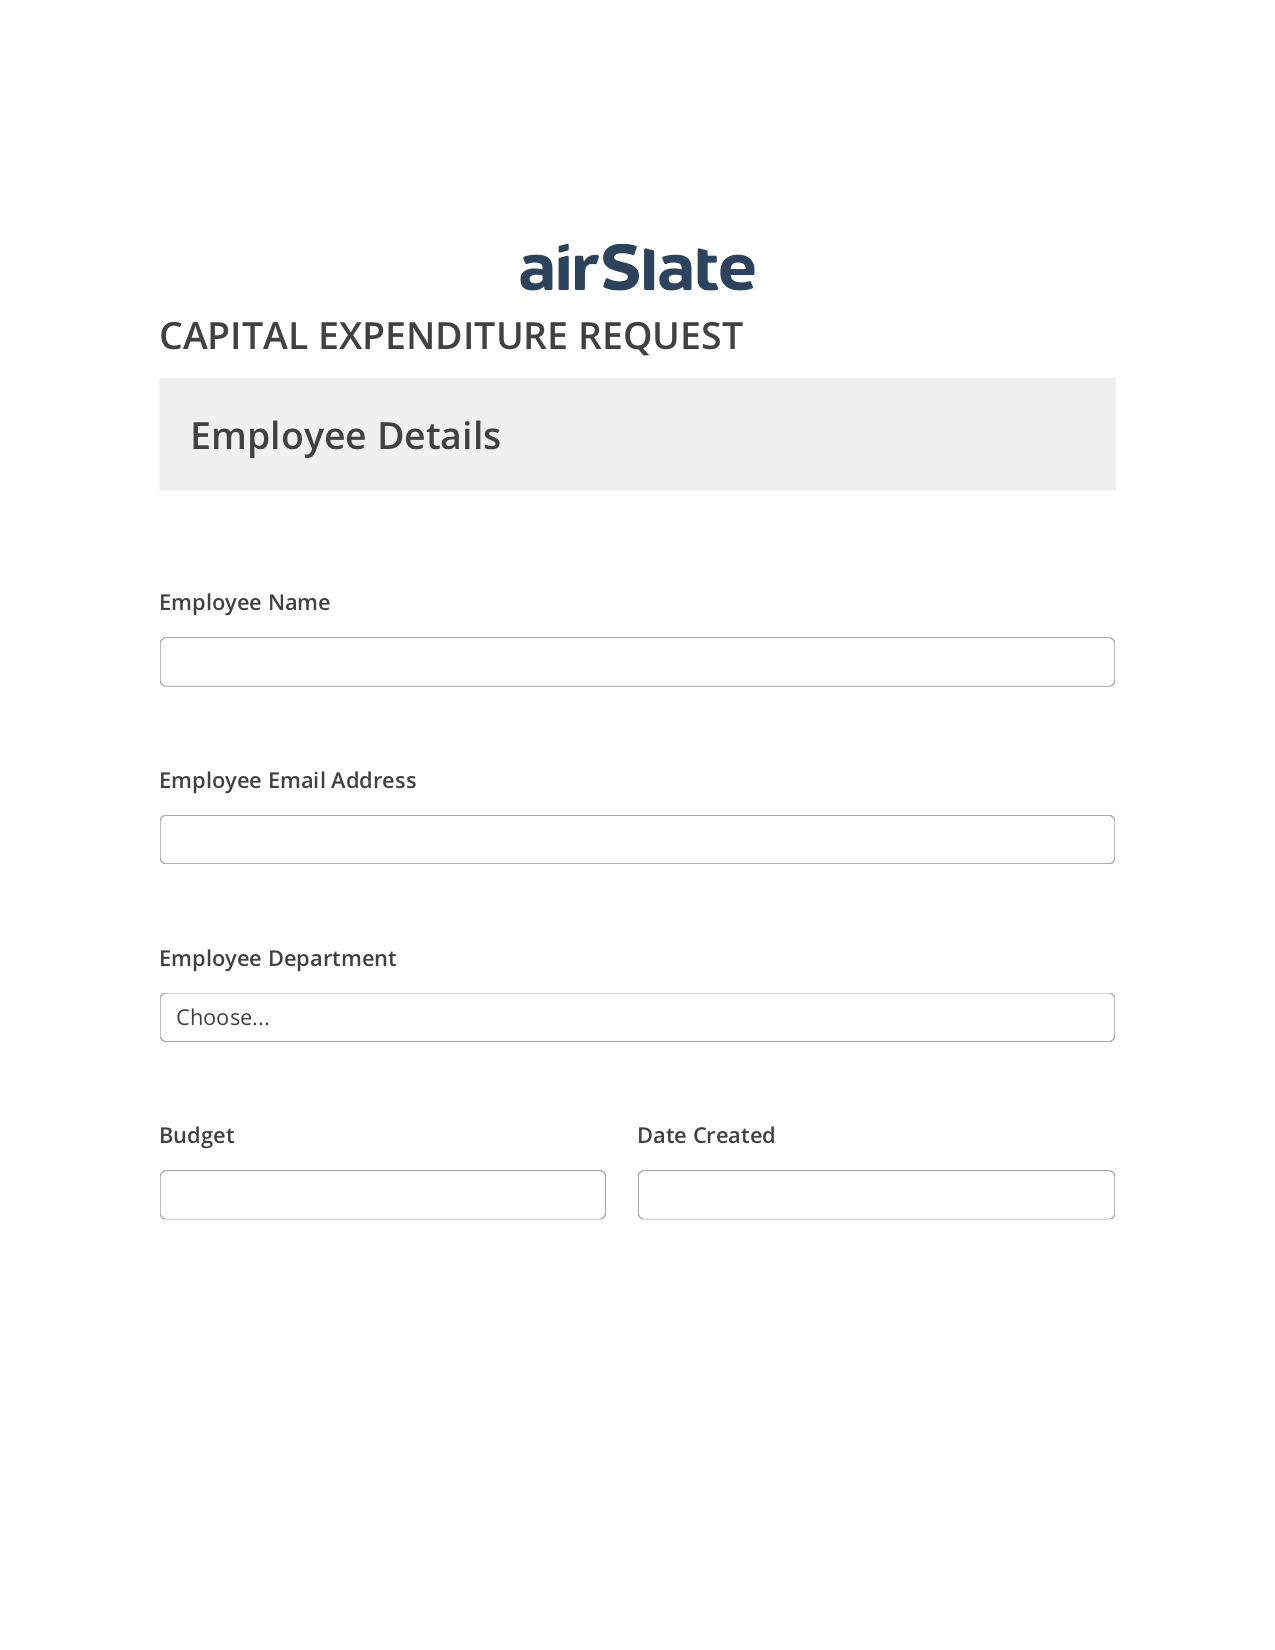 Capital Expenditure Request Approval Workflow Pre-fill from Salesforce Records with SOQL Bot, Lock the Slate Bot, Archive to OneDrive